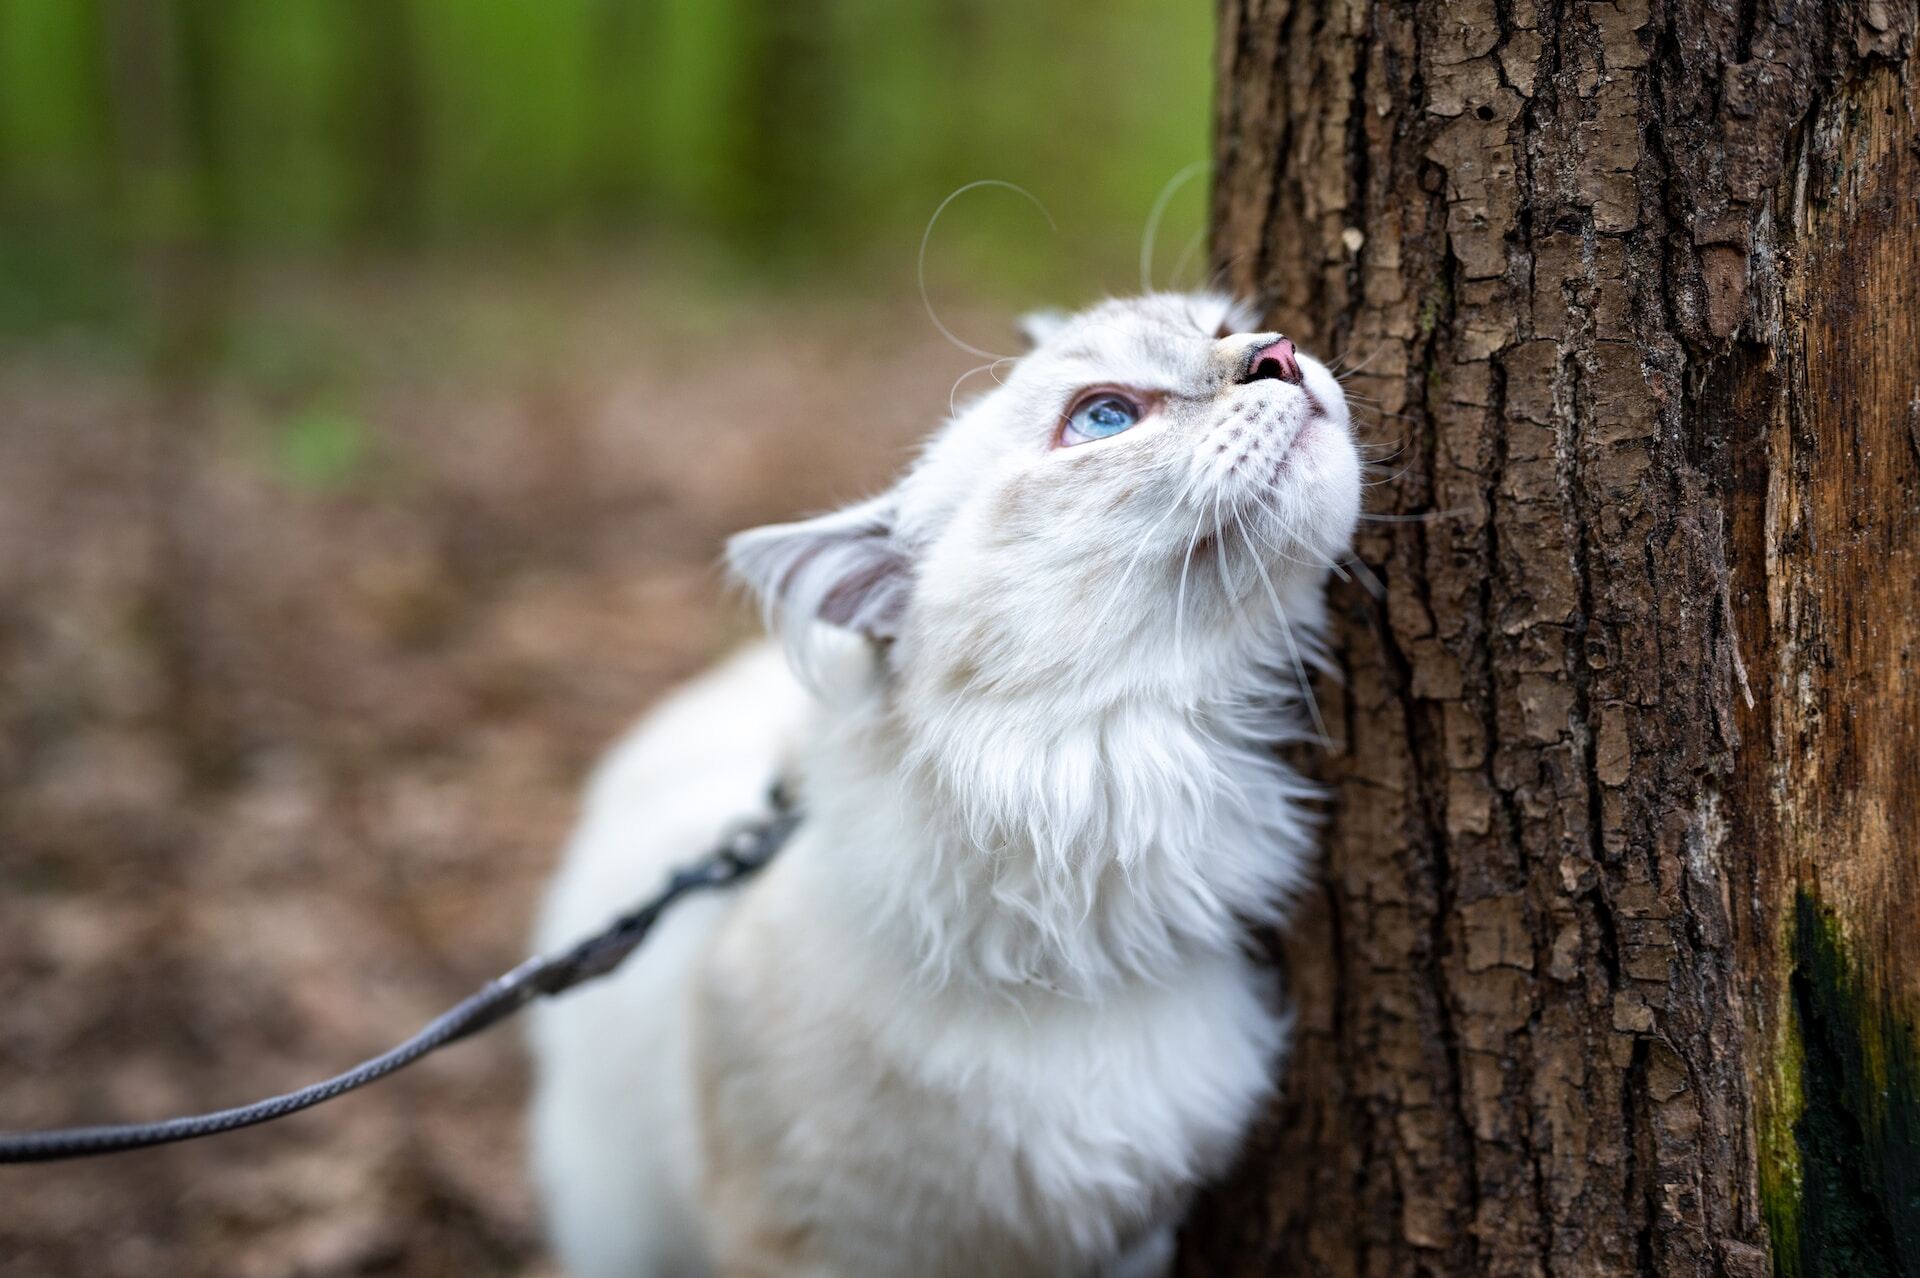 A white cat wearing a harness and leash sniffing a tree